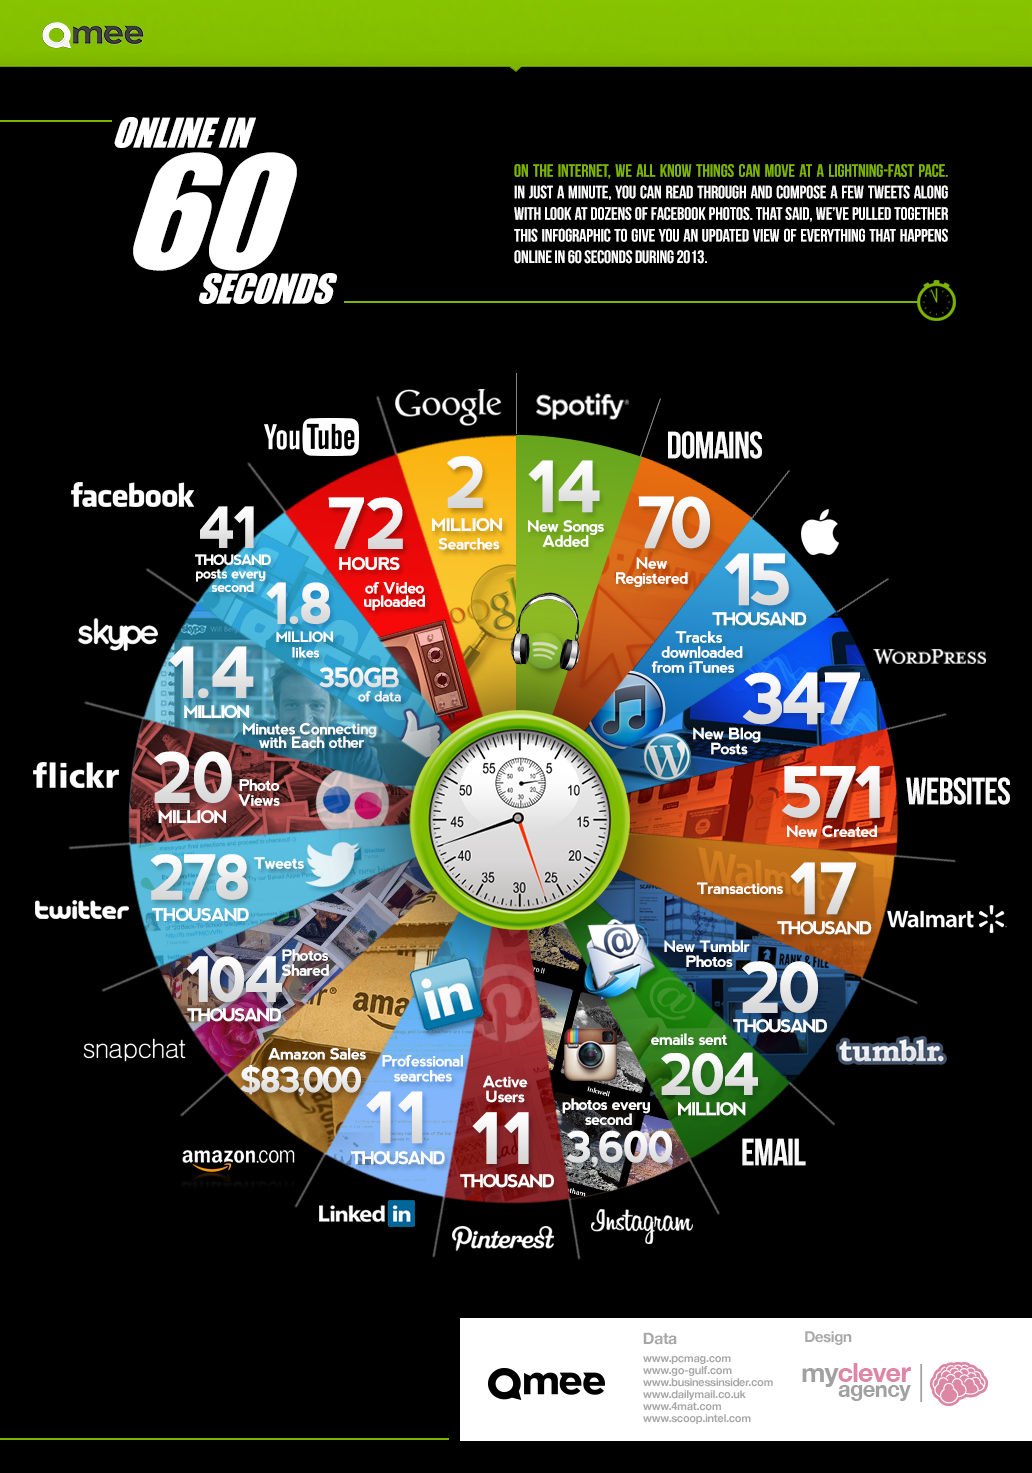 What Happens Online Every 60 Seconds